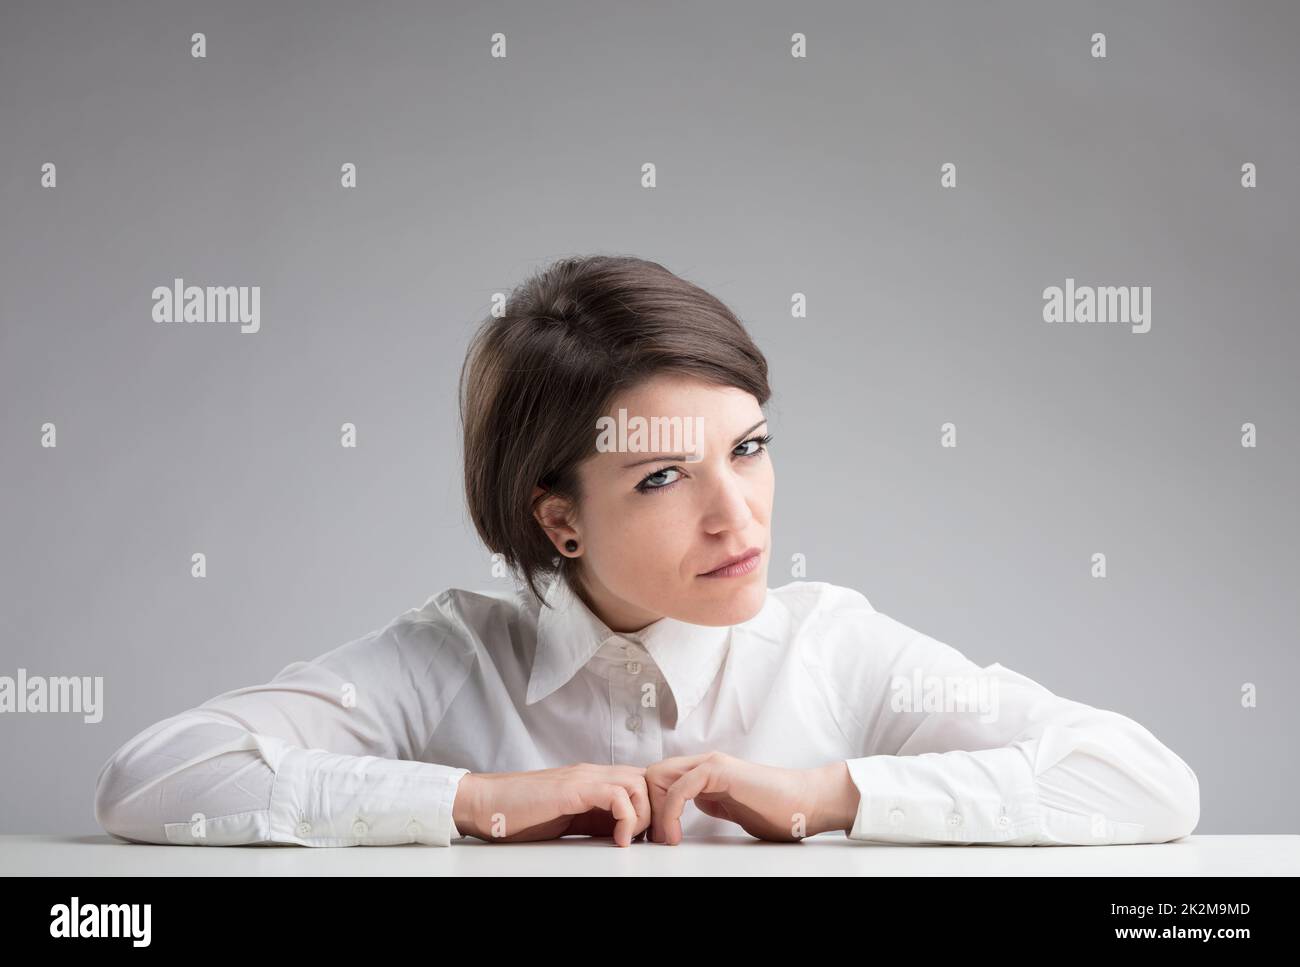 very suspicious woman spotting to find out Stock Photo